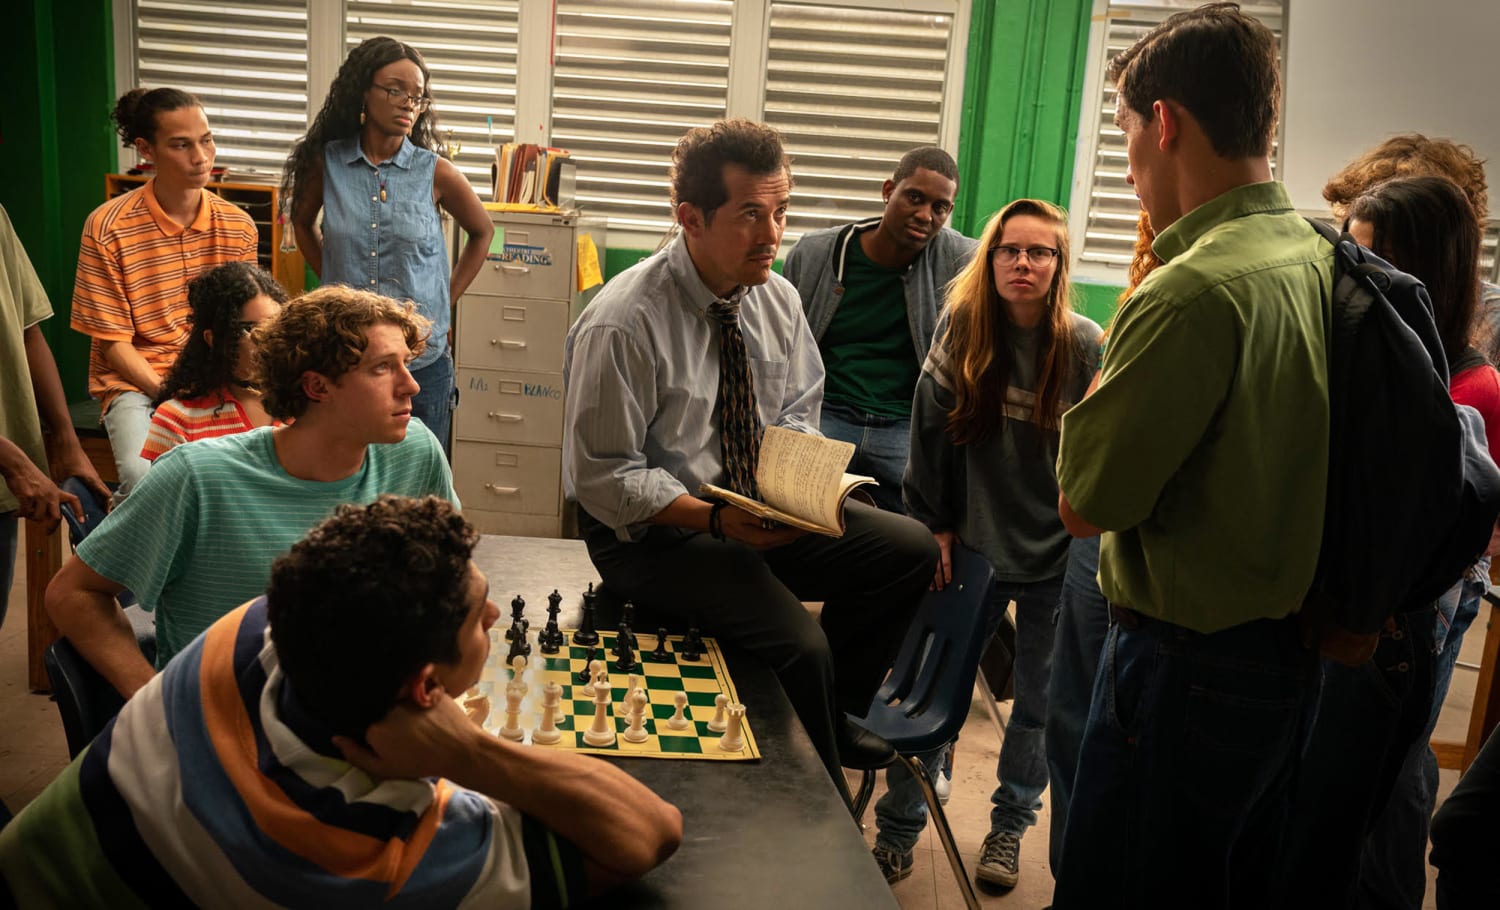 John Leguizamo, his chess movie on hold, is still two steps ahead